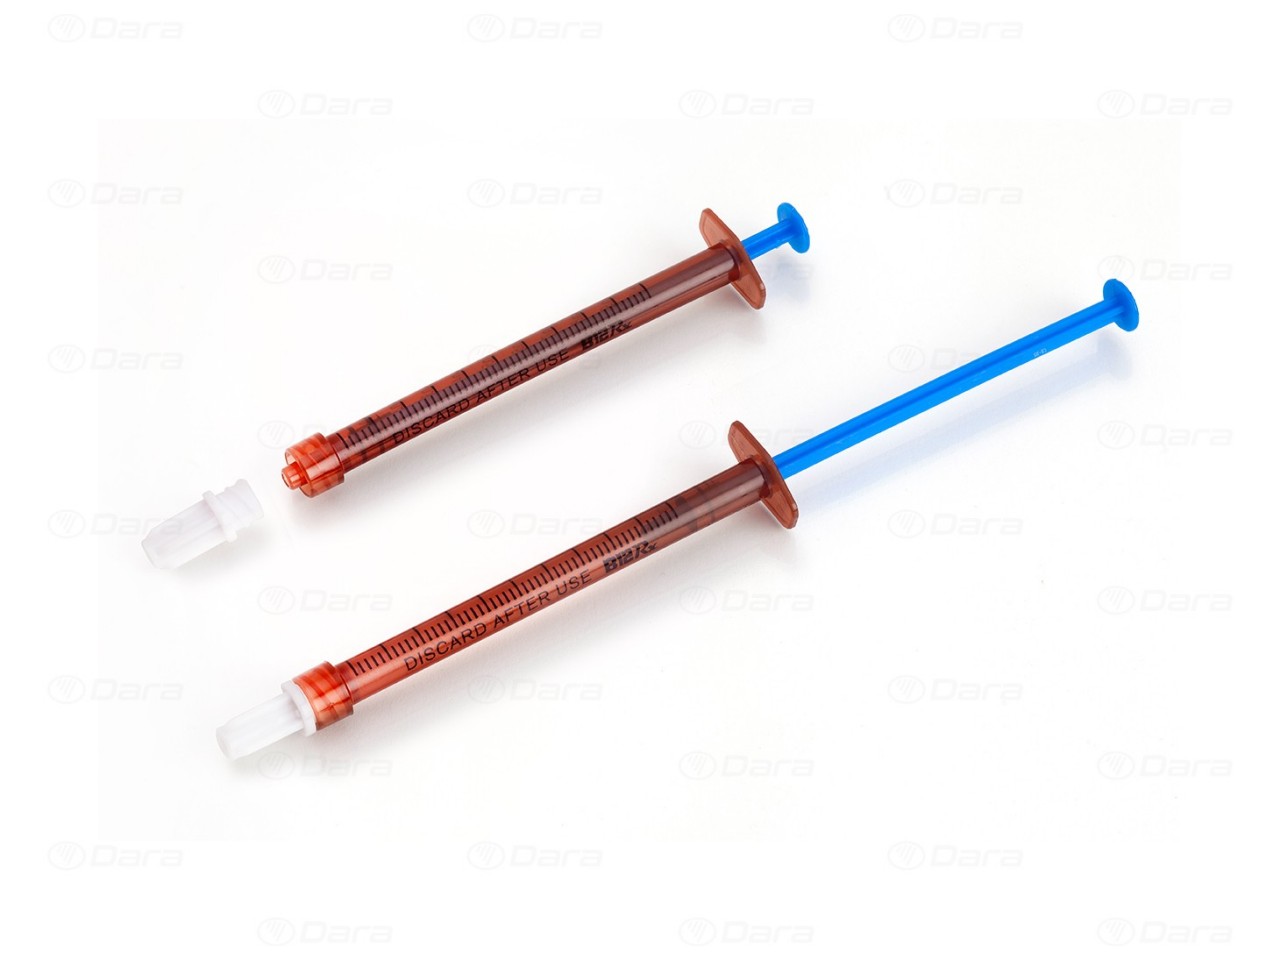 Rotary fillers - cappers for plastic syringes